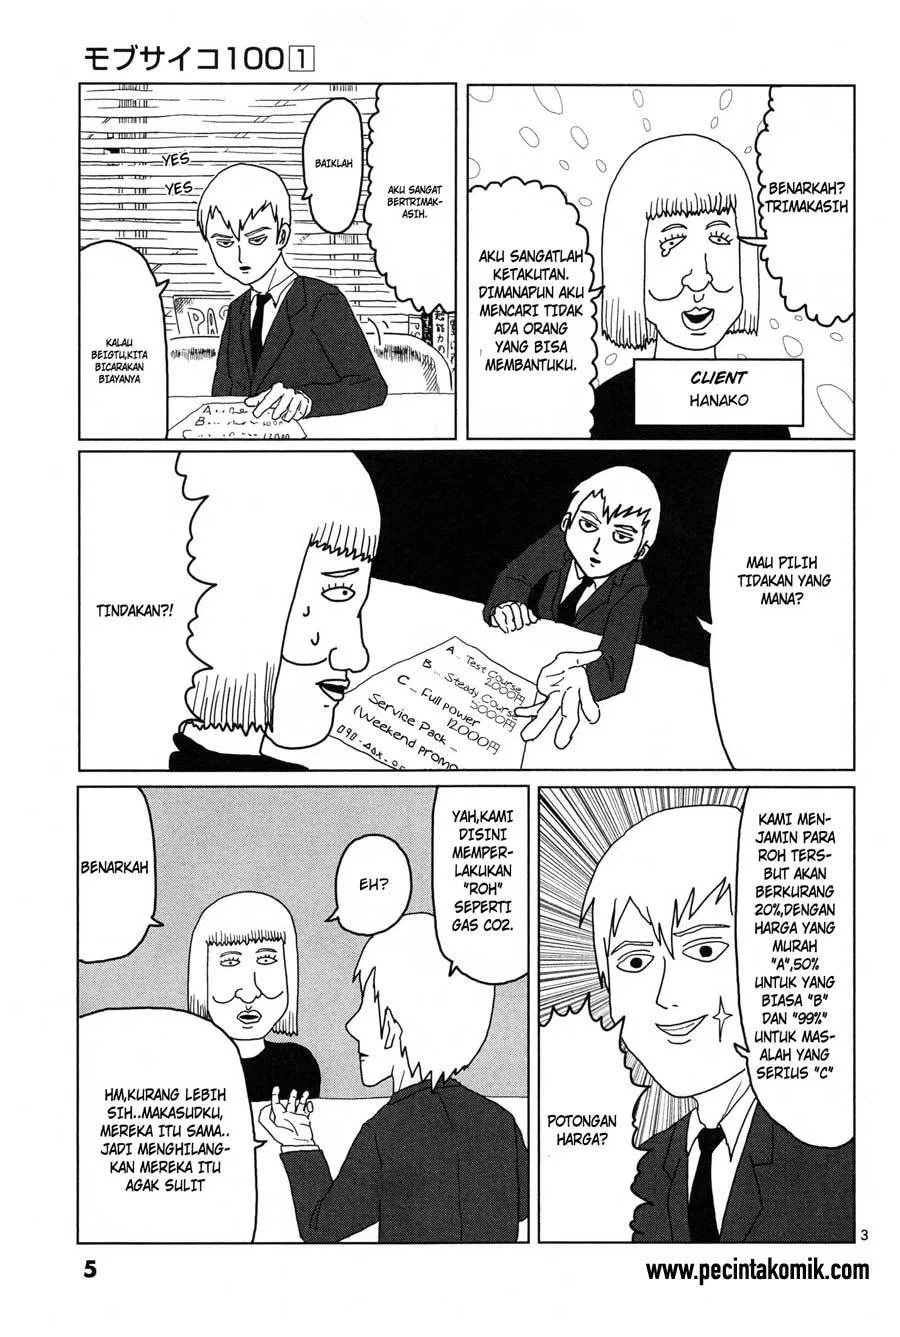 Mob Psycho 100 Chapter 1